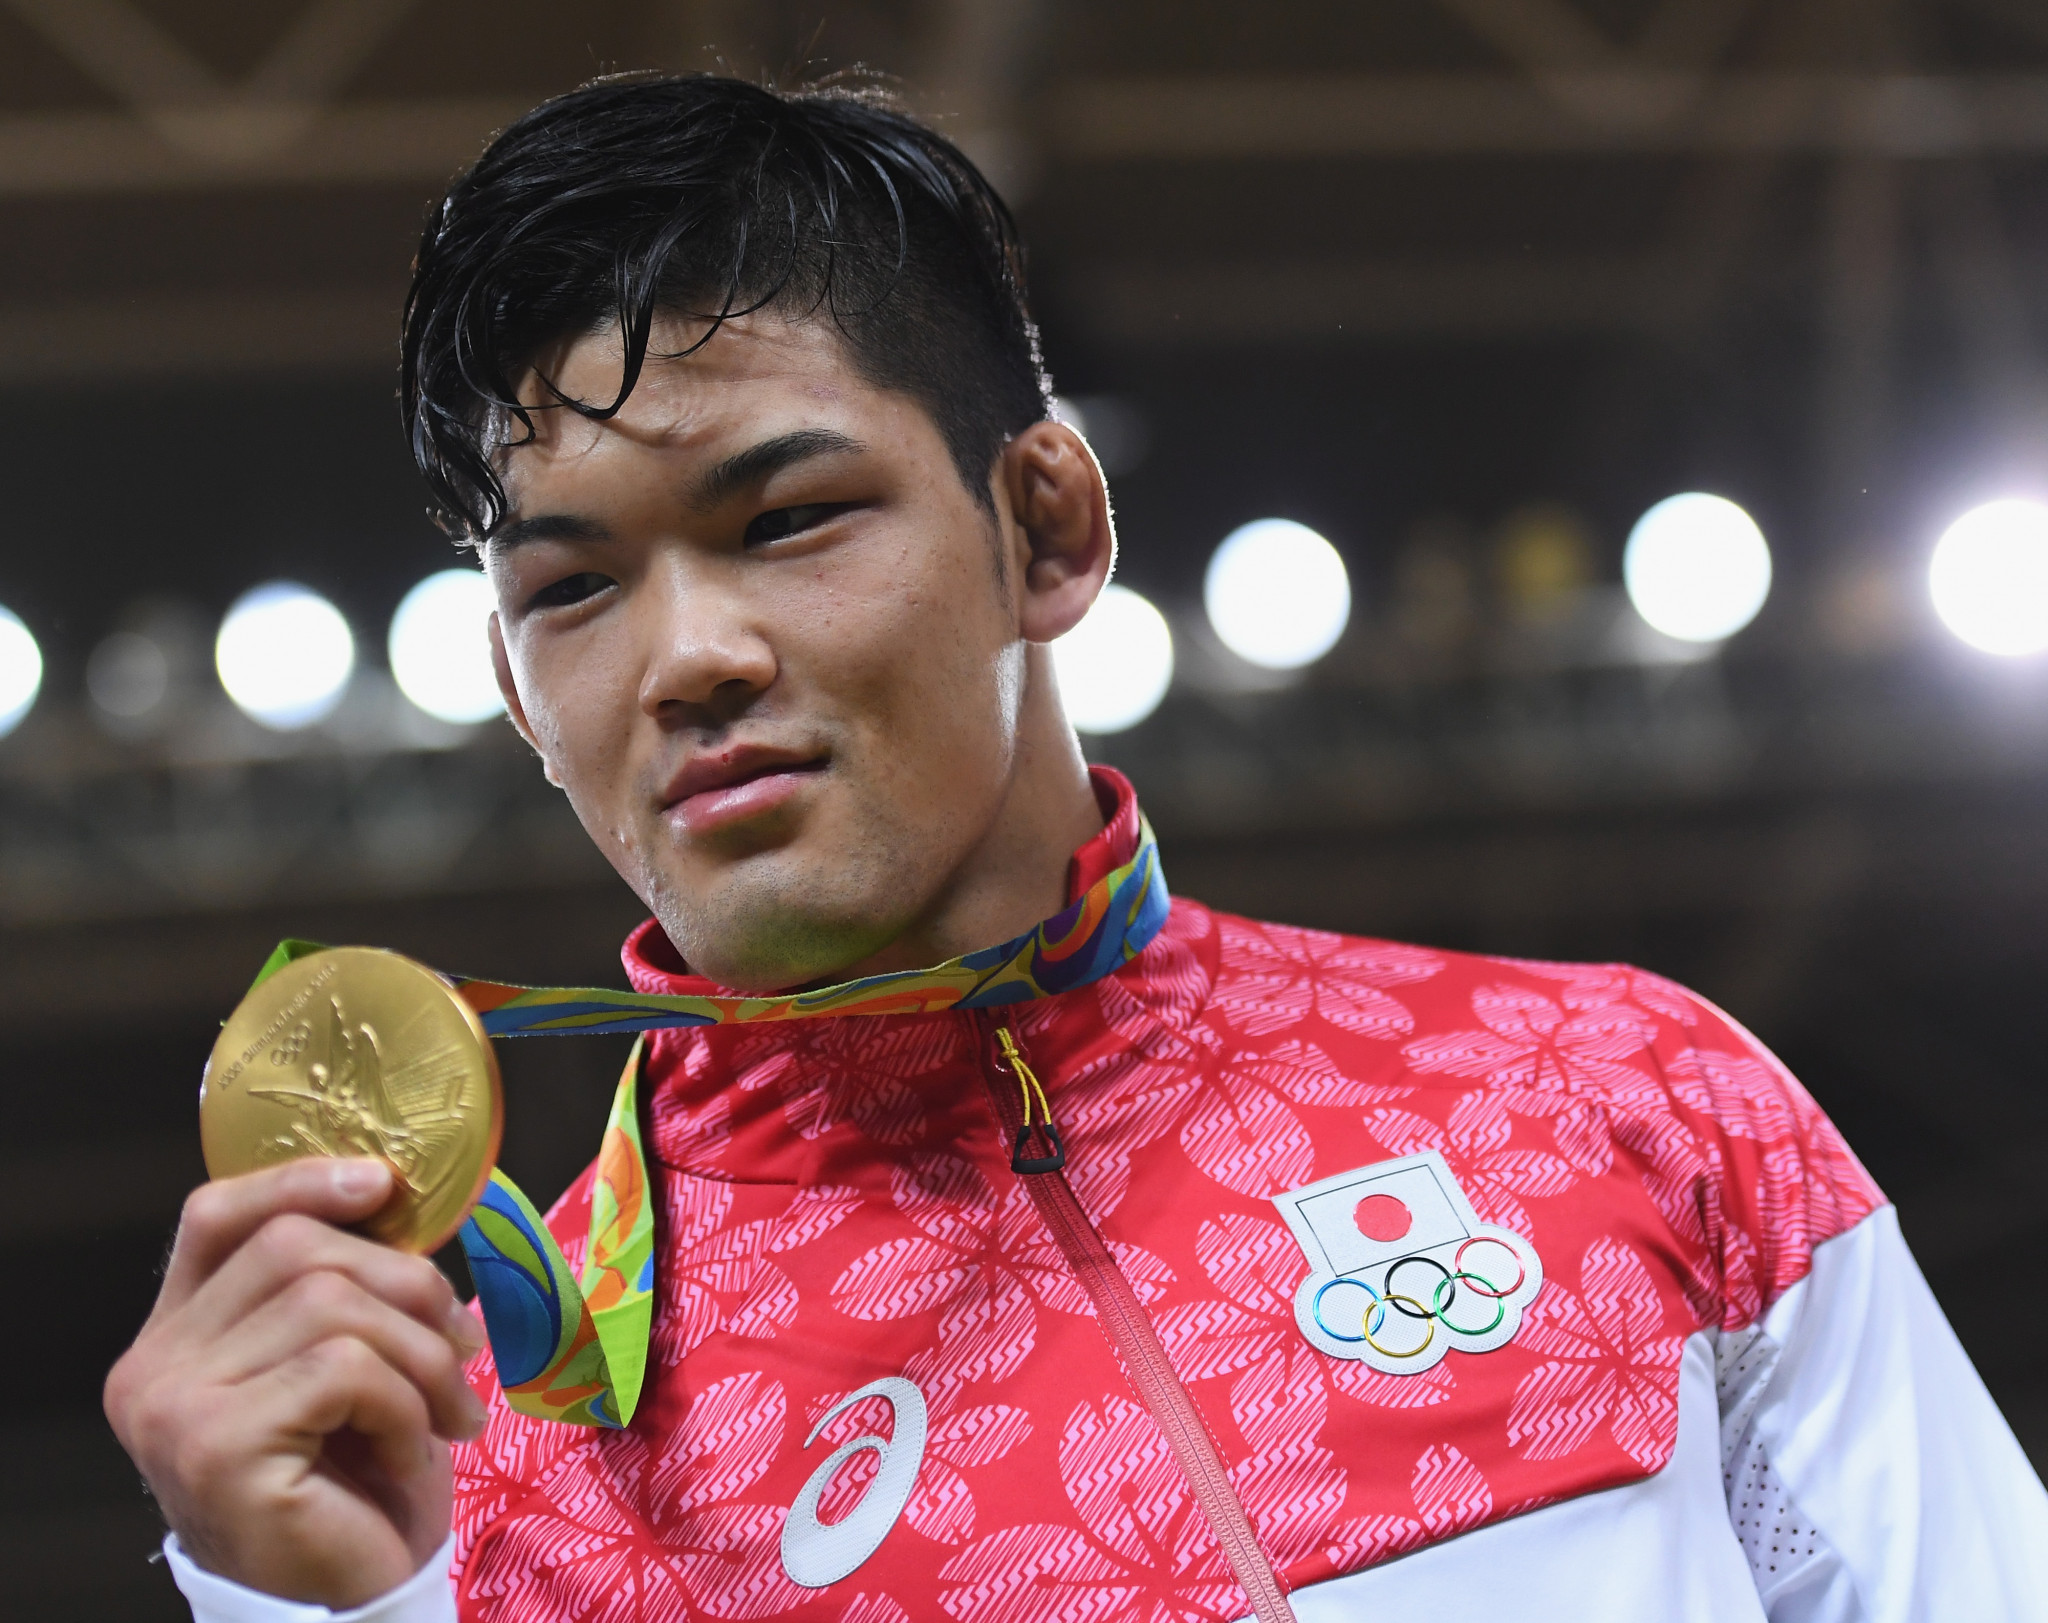 Shohei Ono triumphed at the Rio 2016 Olympic Games ©Getty Images